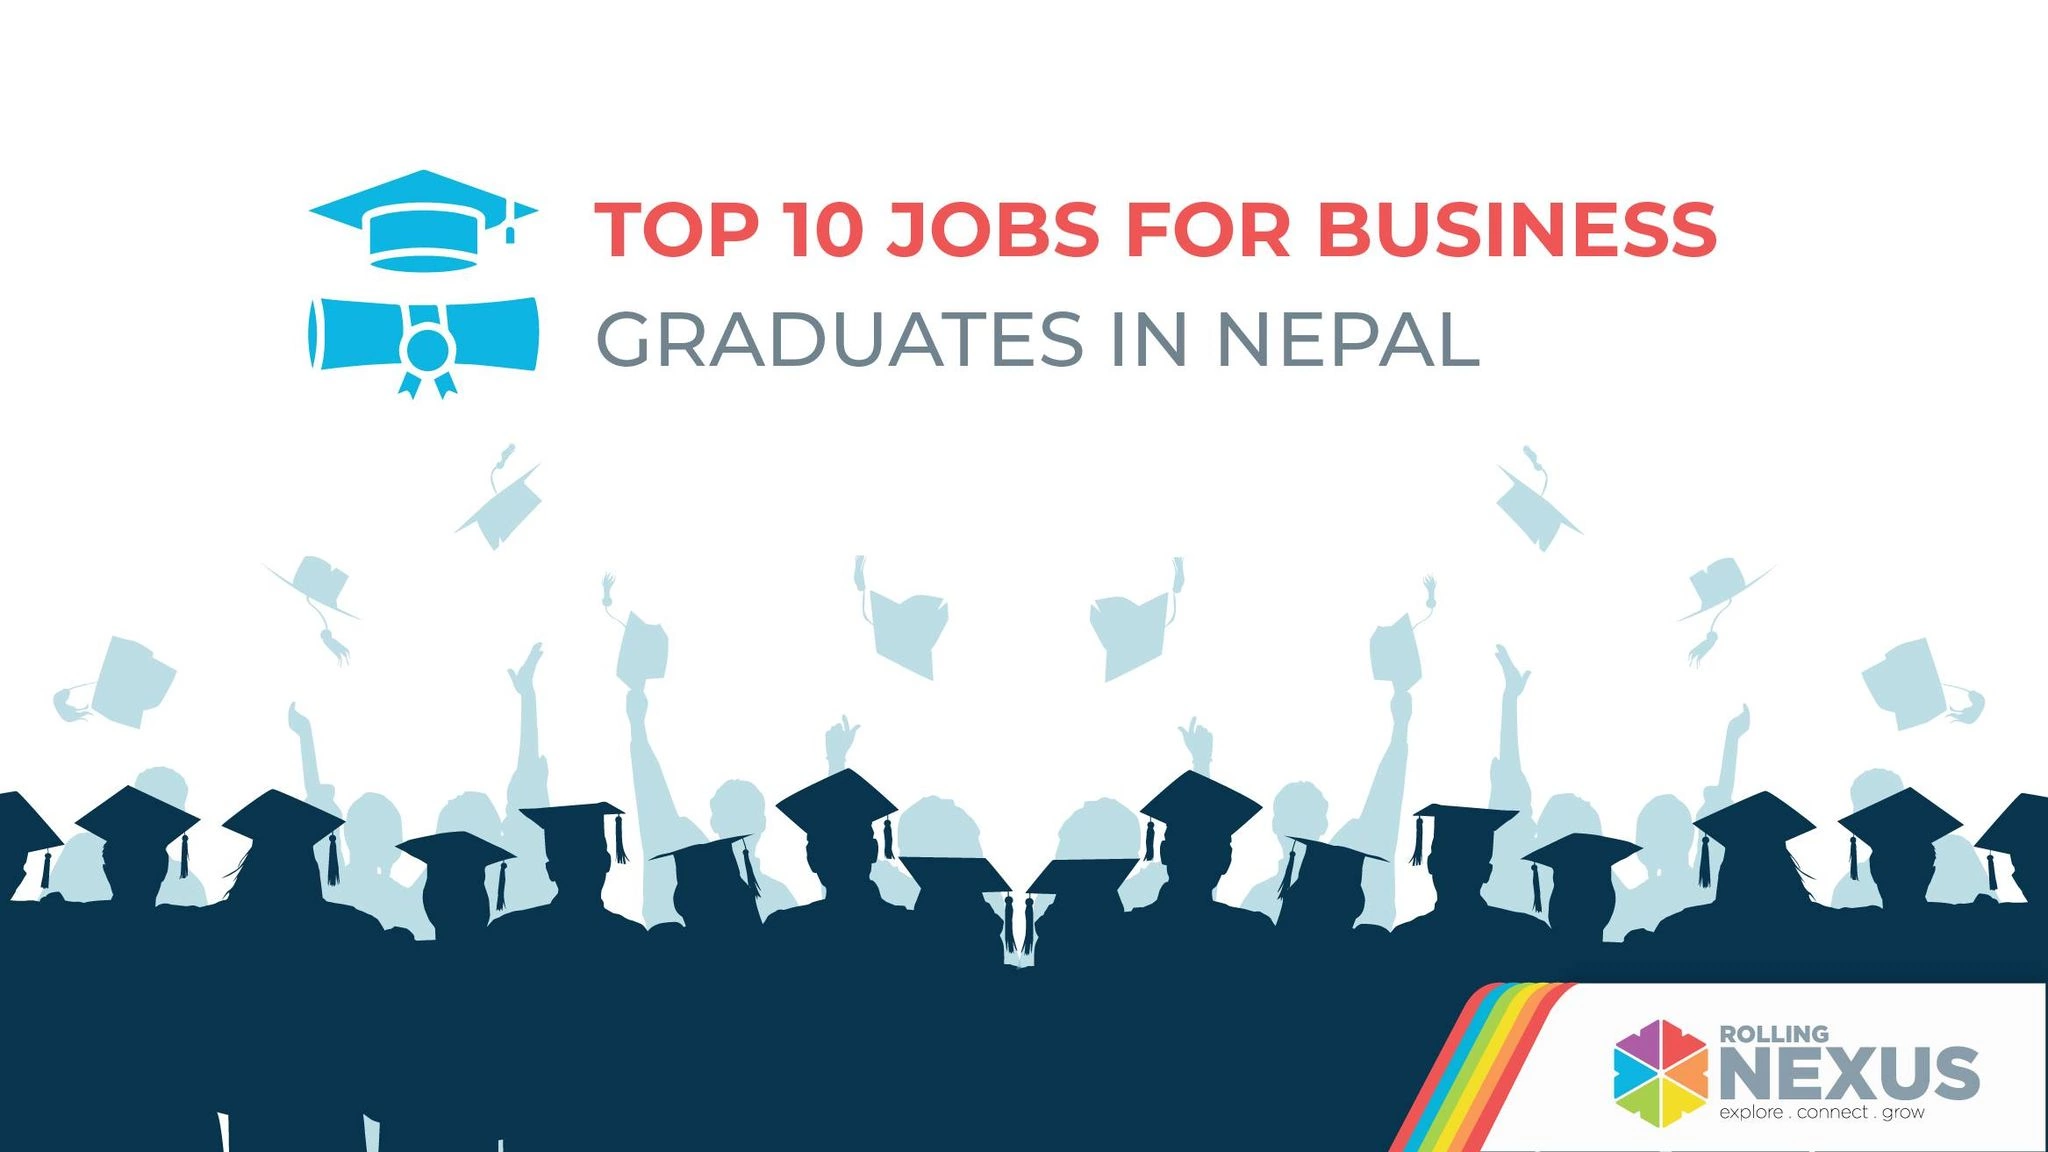 Top 10 Jobs for Business Graduates in Nepal